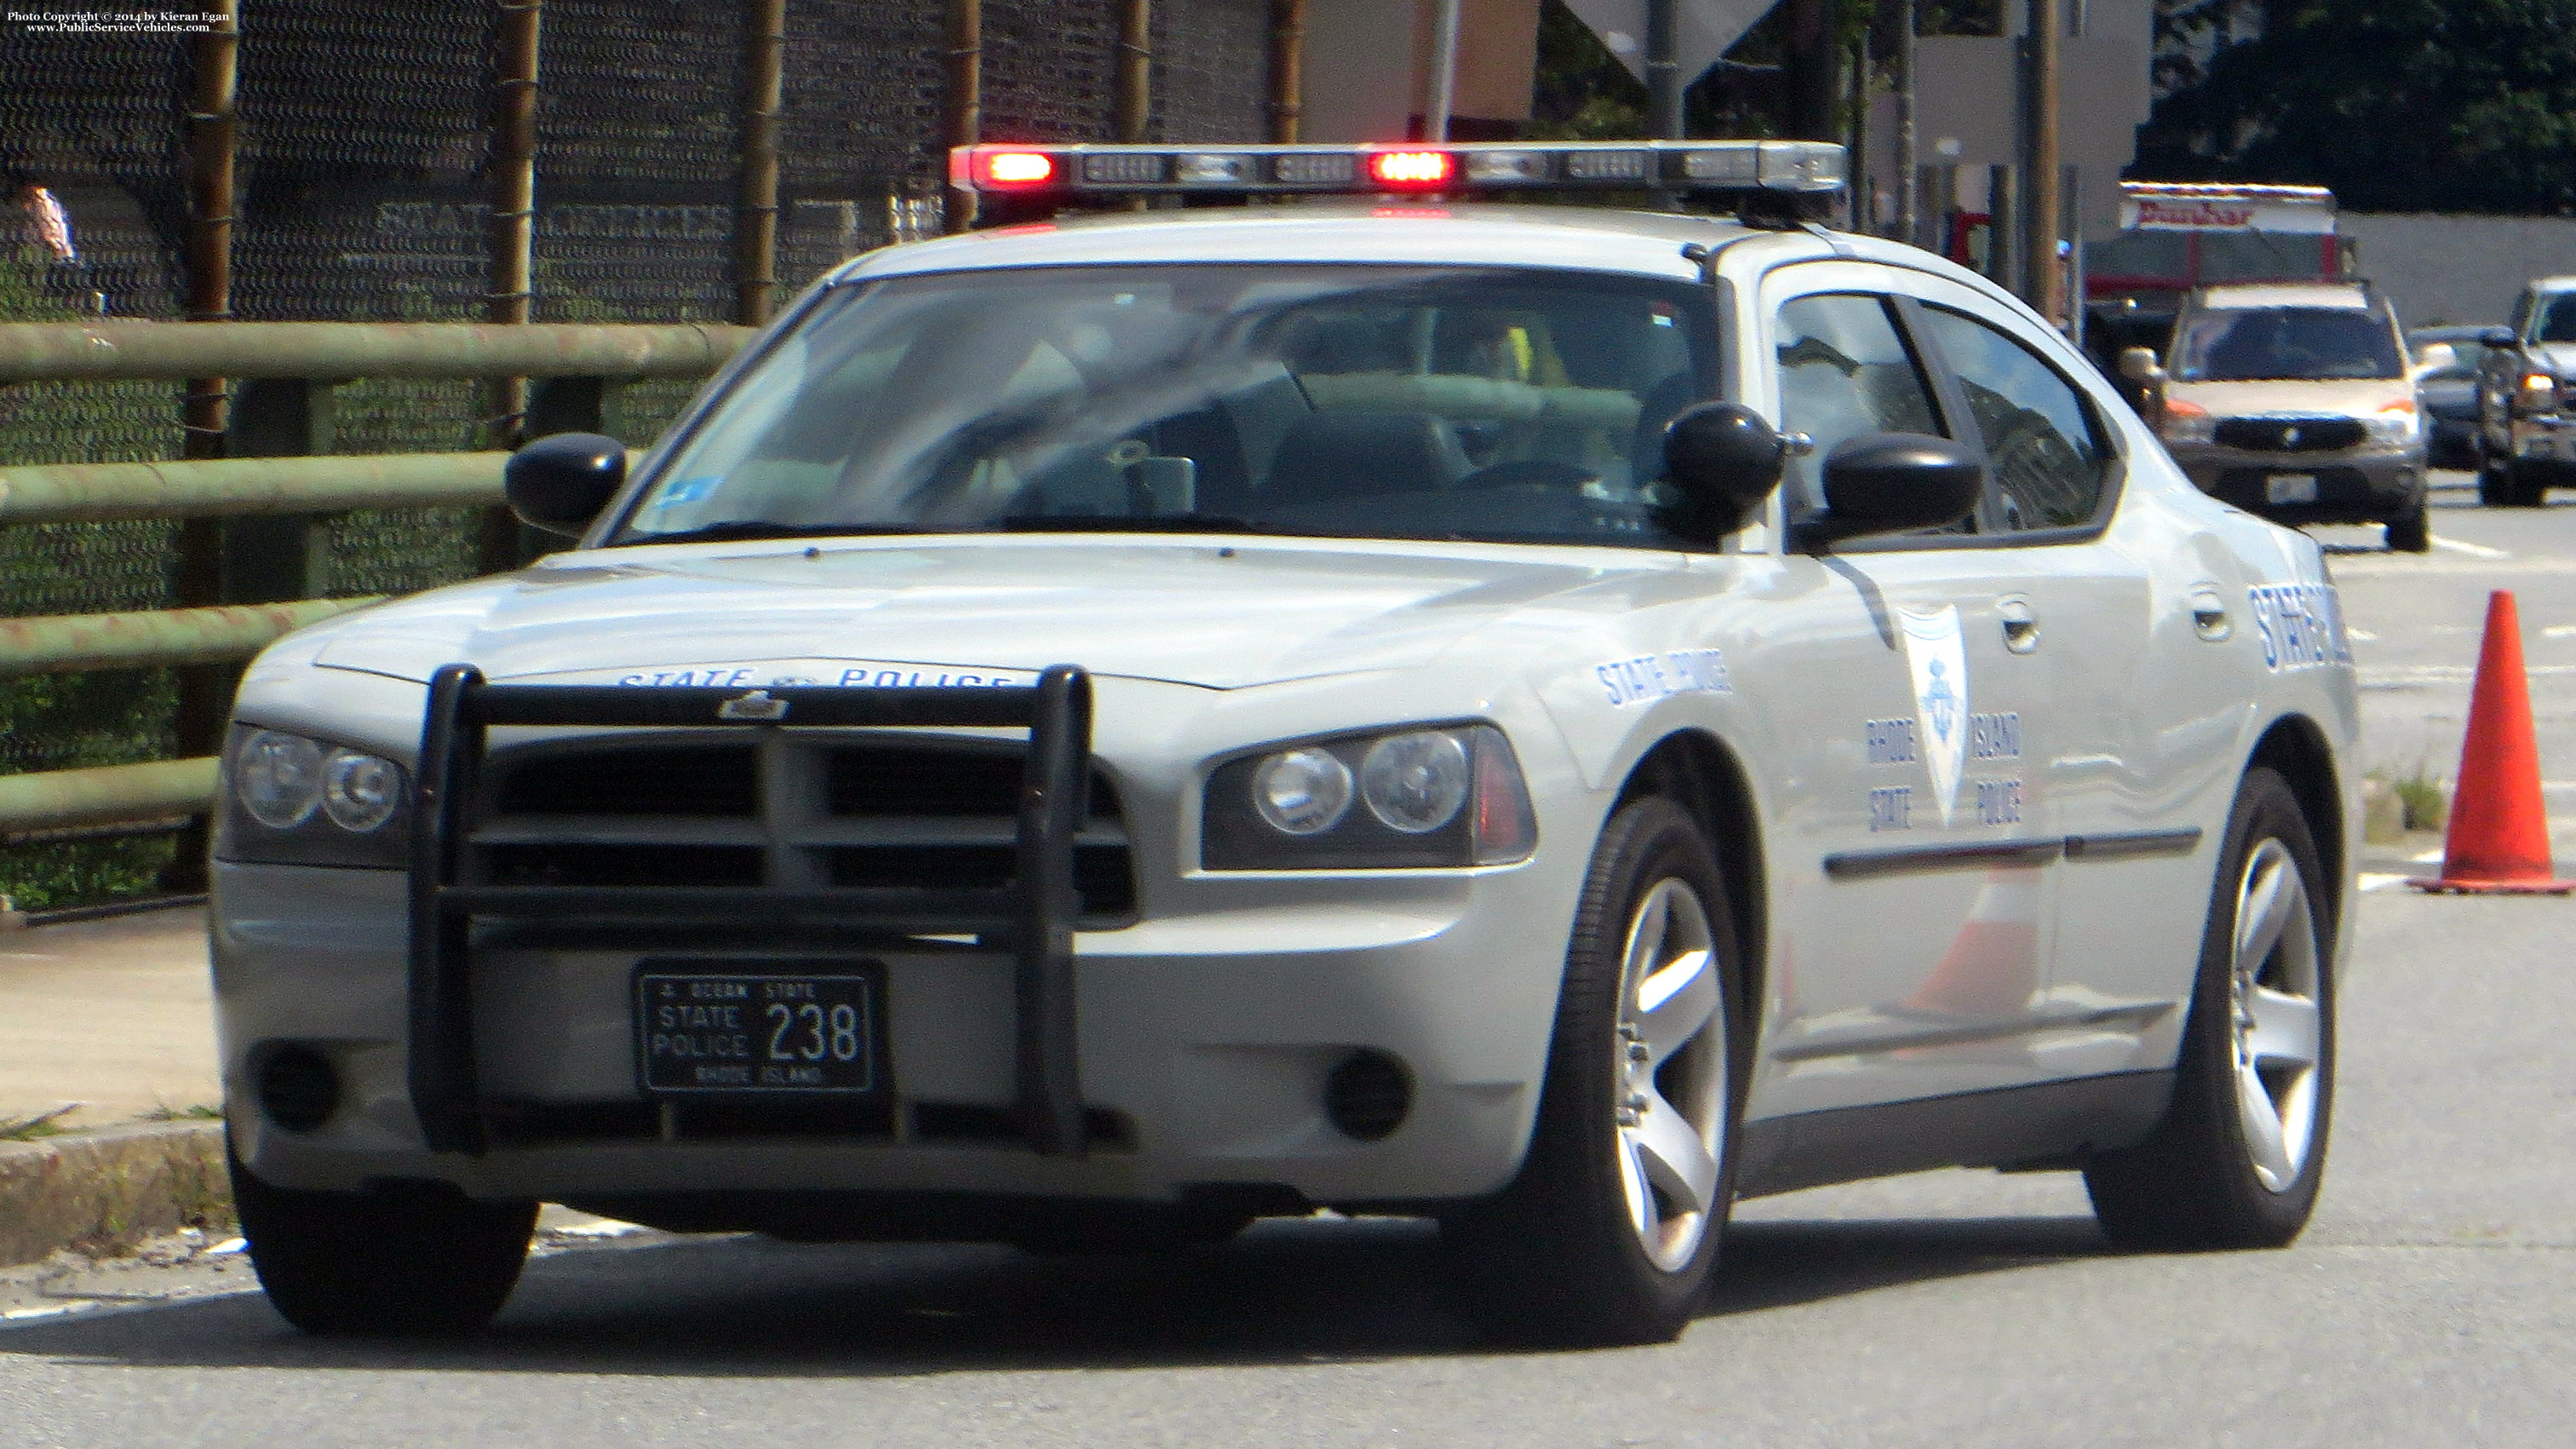 A photo  of Rhode Island State Police
            Cruiser 238, a 2006-2008 Dodge Charger             taken by Kieran Egan